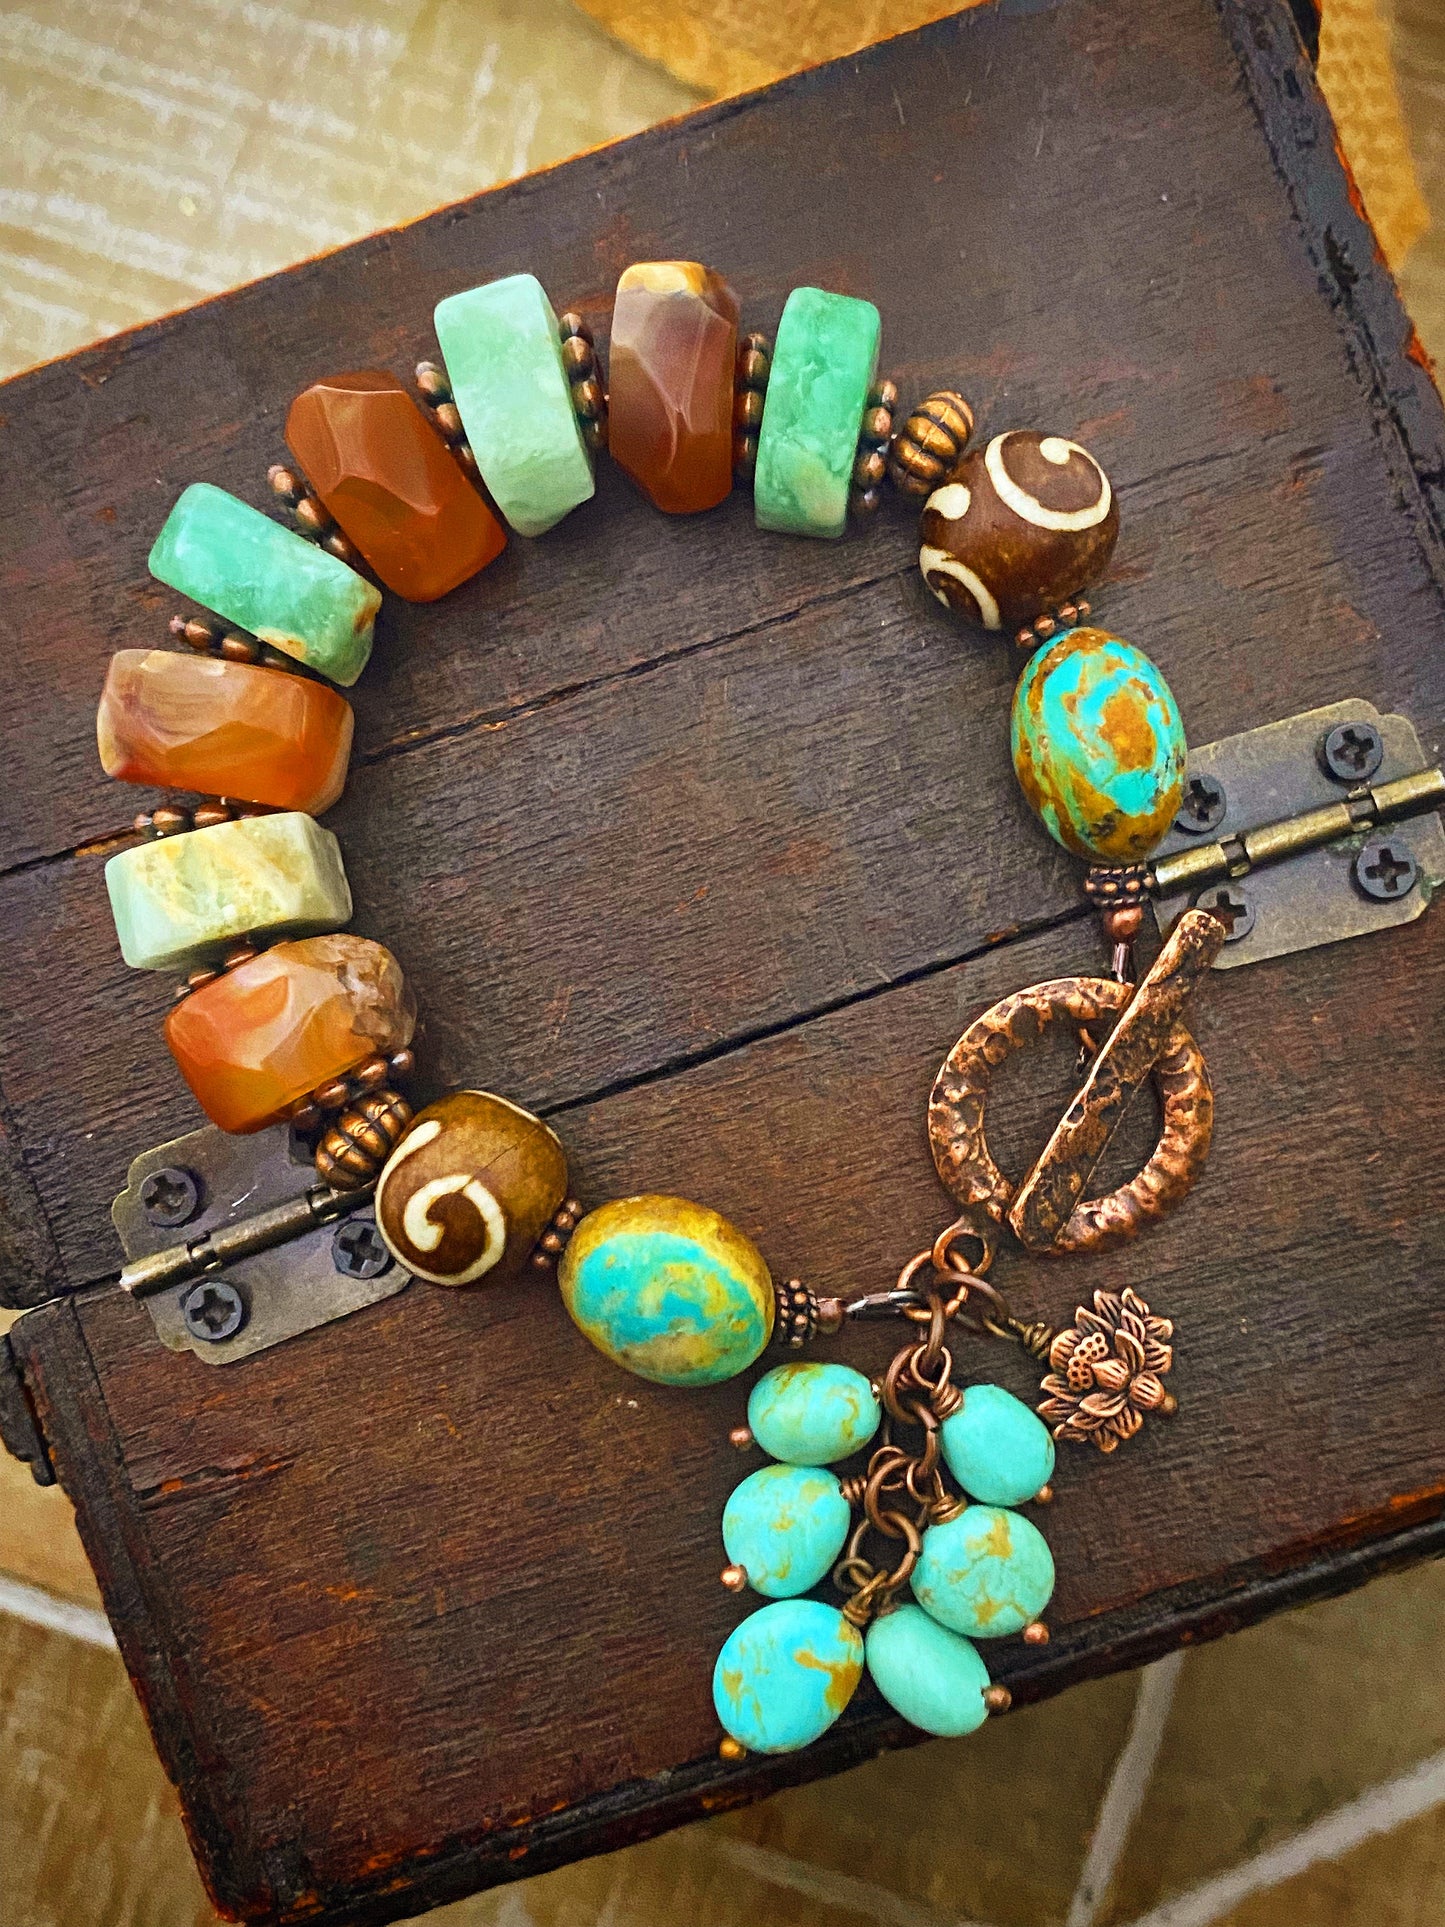 Genuine turquoise stone, Chrysophase stones, carnelian agate stones, African wood beads, copper metal, bracelet